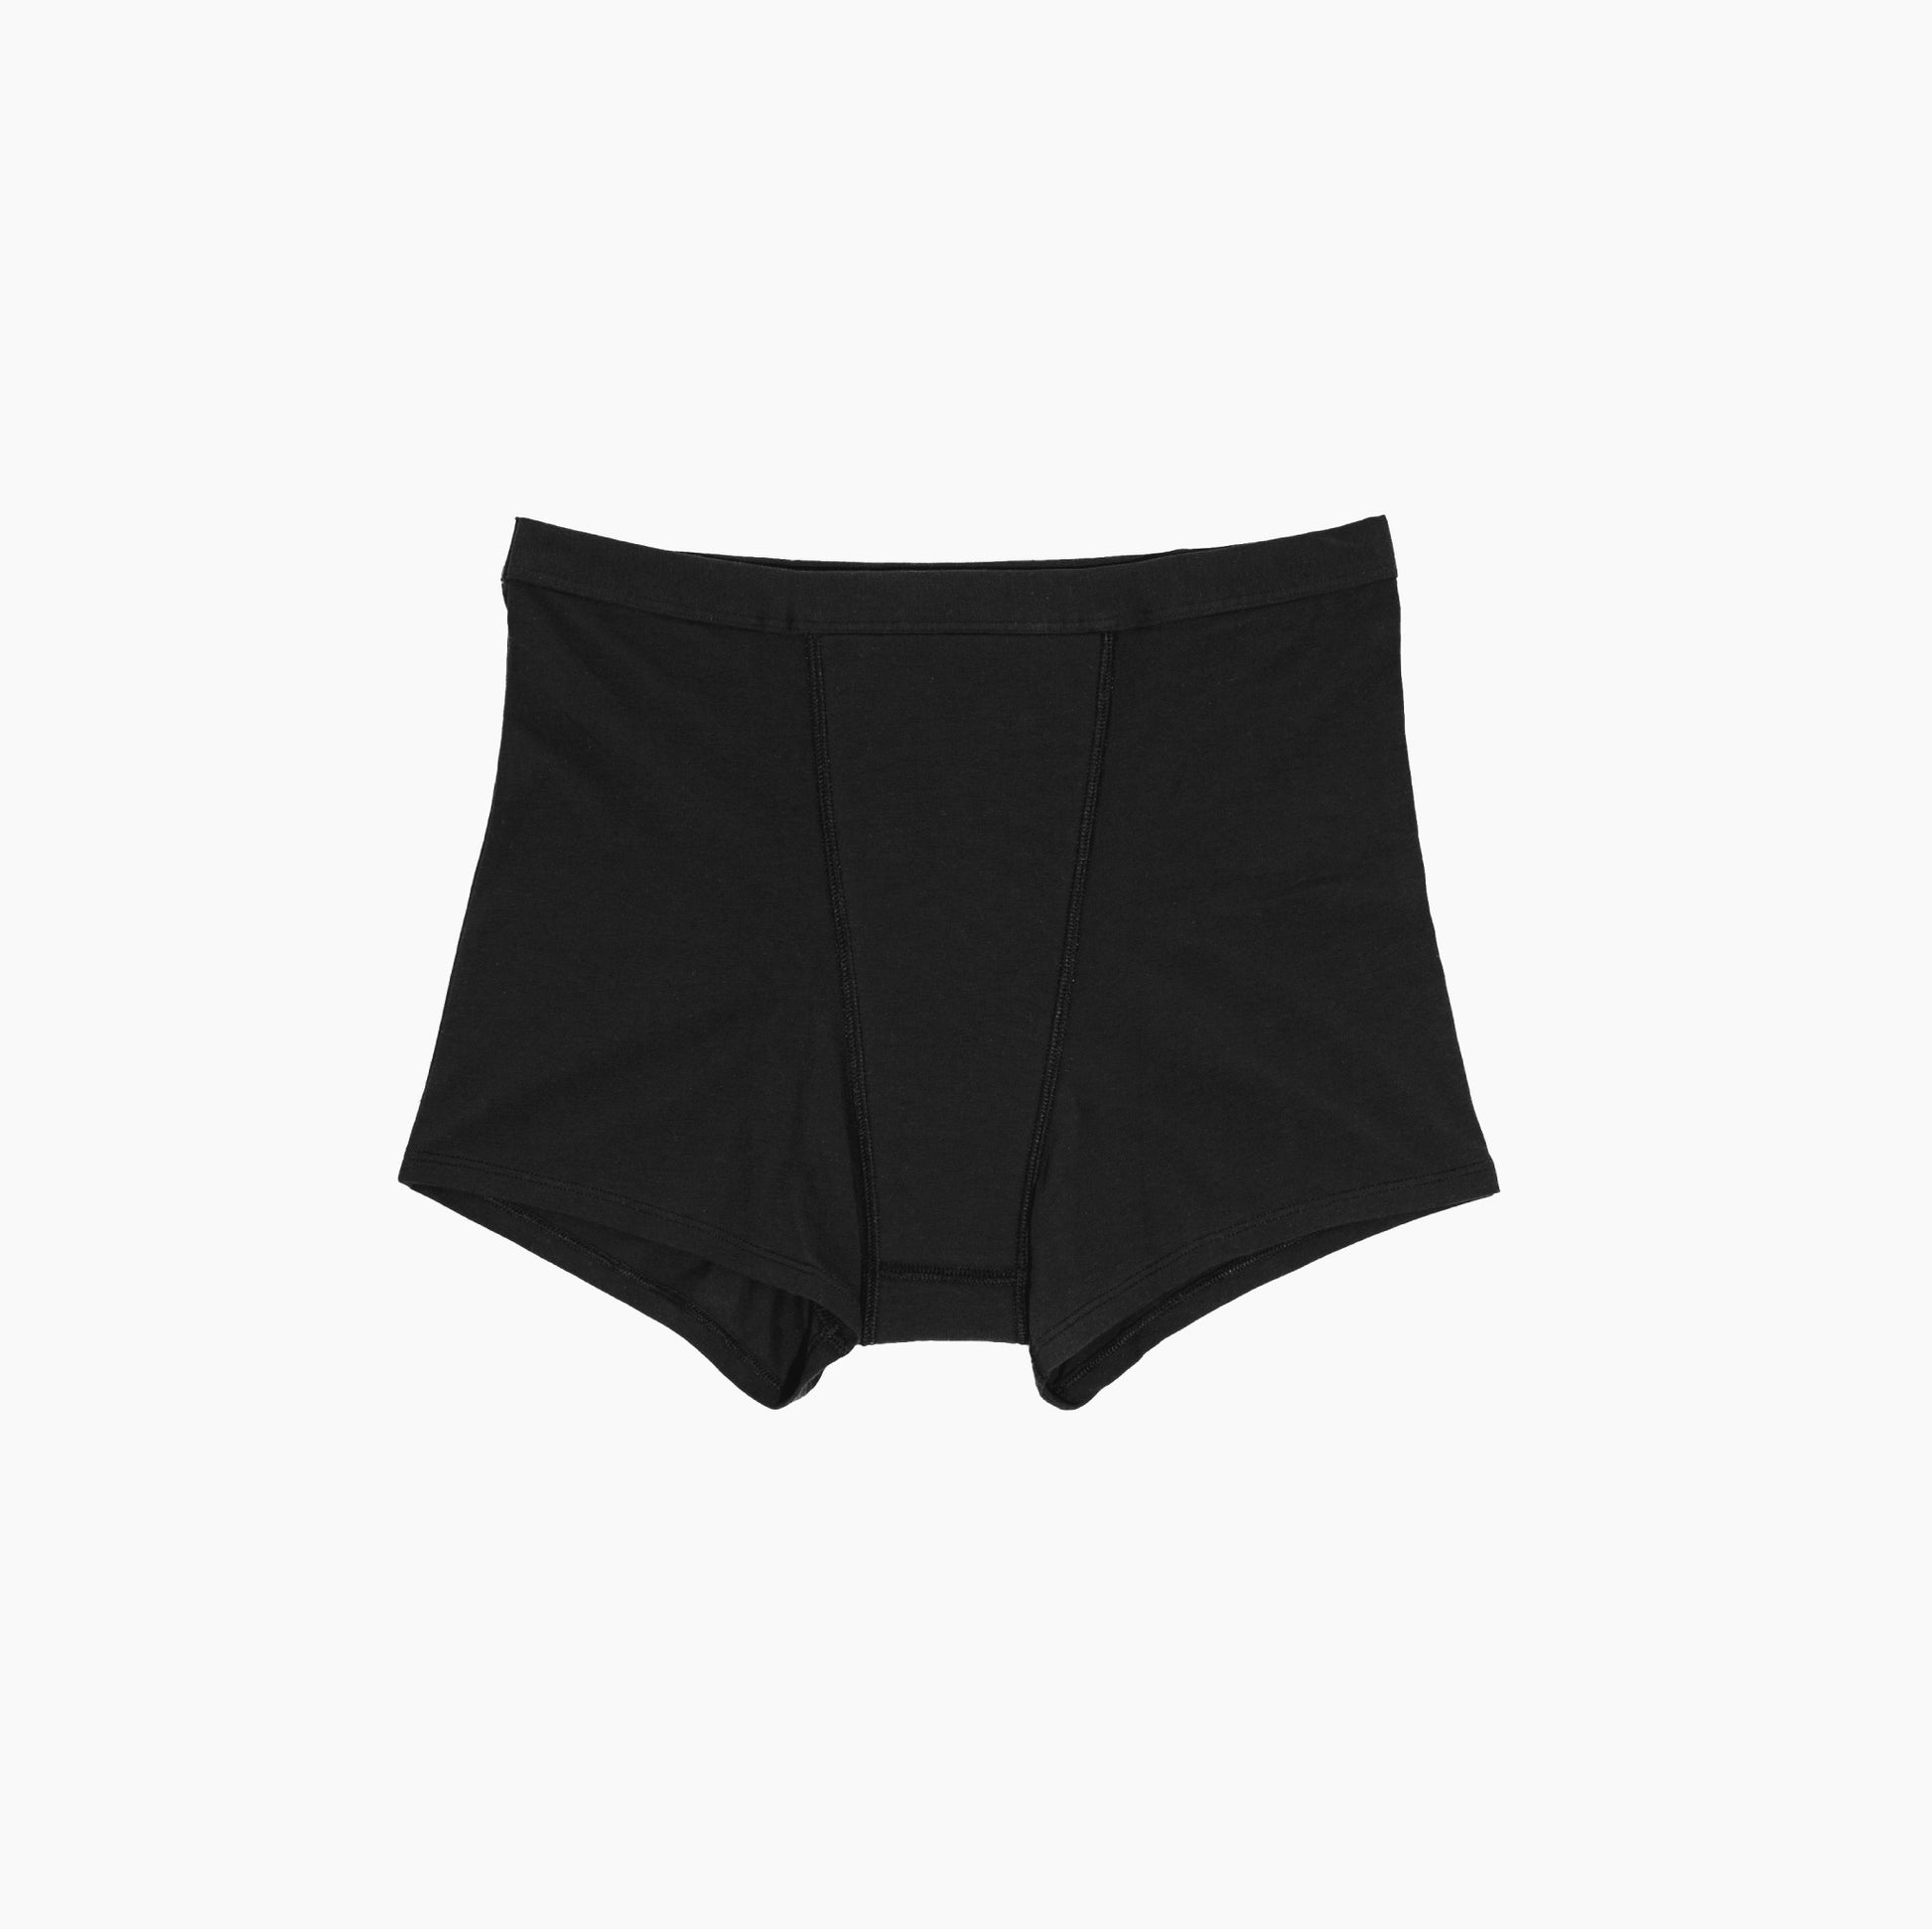 Saalt EveryWear Cotton Brief Period Underwear - Heavy Absorbency -  Comfortable, Thin, and Keeps You Dry from All Leaks